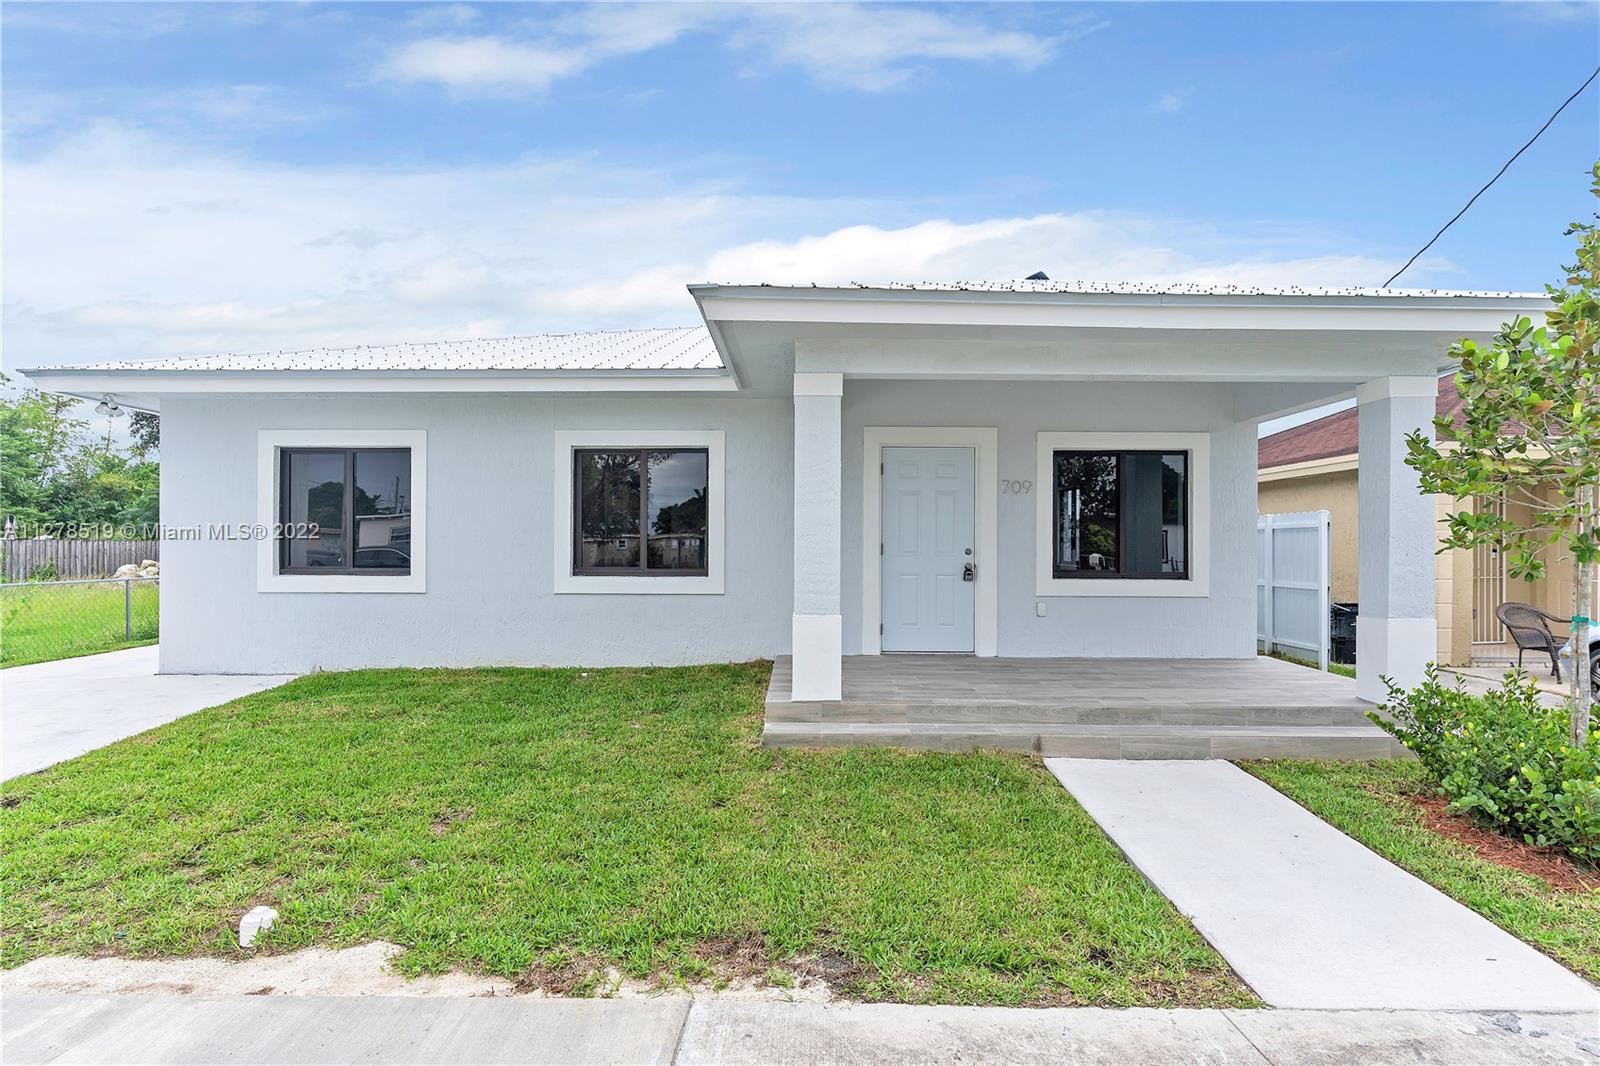 NEW CONSTRUCTION!! MODERN 4 BEDROOM 2 BATHROOM WITH SPACIOUS BACKYARD THAT IS FENCED IN. IMPACT WINDOWS AND DOORS. METAL ROOF. PORCELAIN TILE FLOORS. SHAKER KITCHEN CABINETS WITH GRANITE COUNTERTOPS AND STAINLESS STEAL APPLIANCES. INDOOR LAUNDRY CLOSET. NO HOMEOWNERS ASSOCIATION.